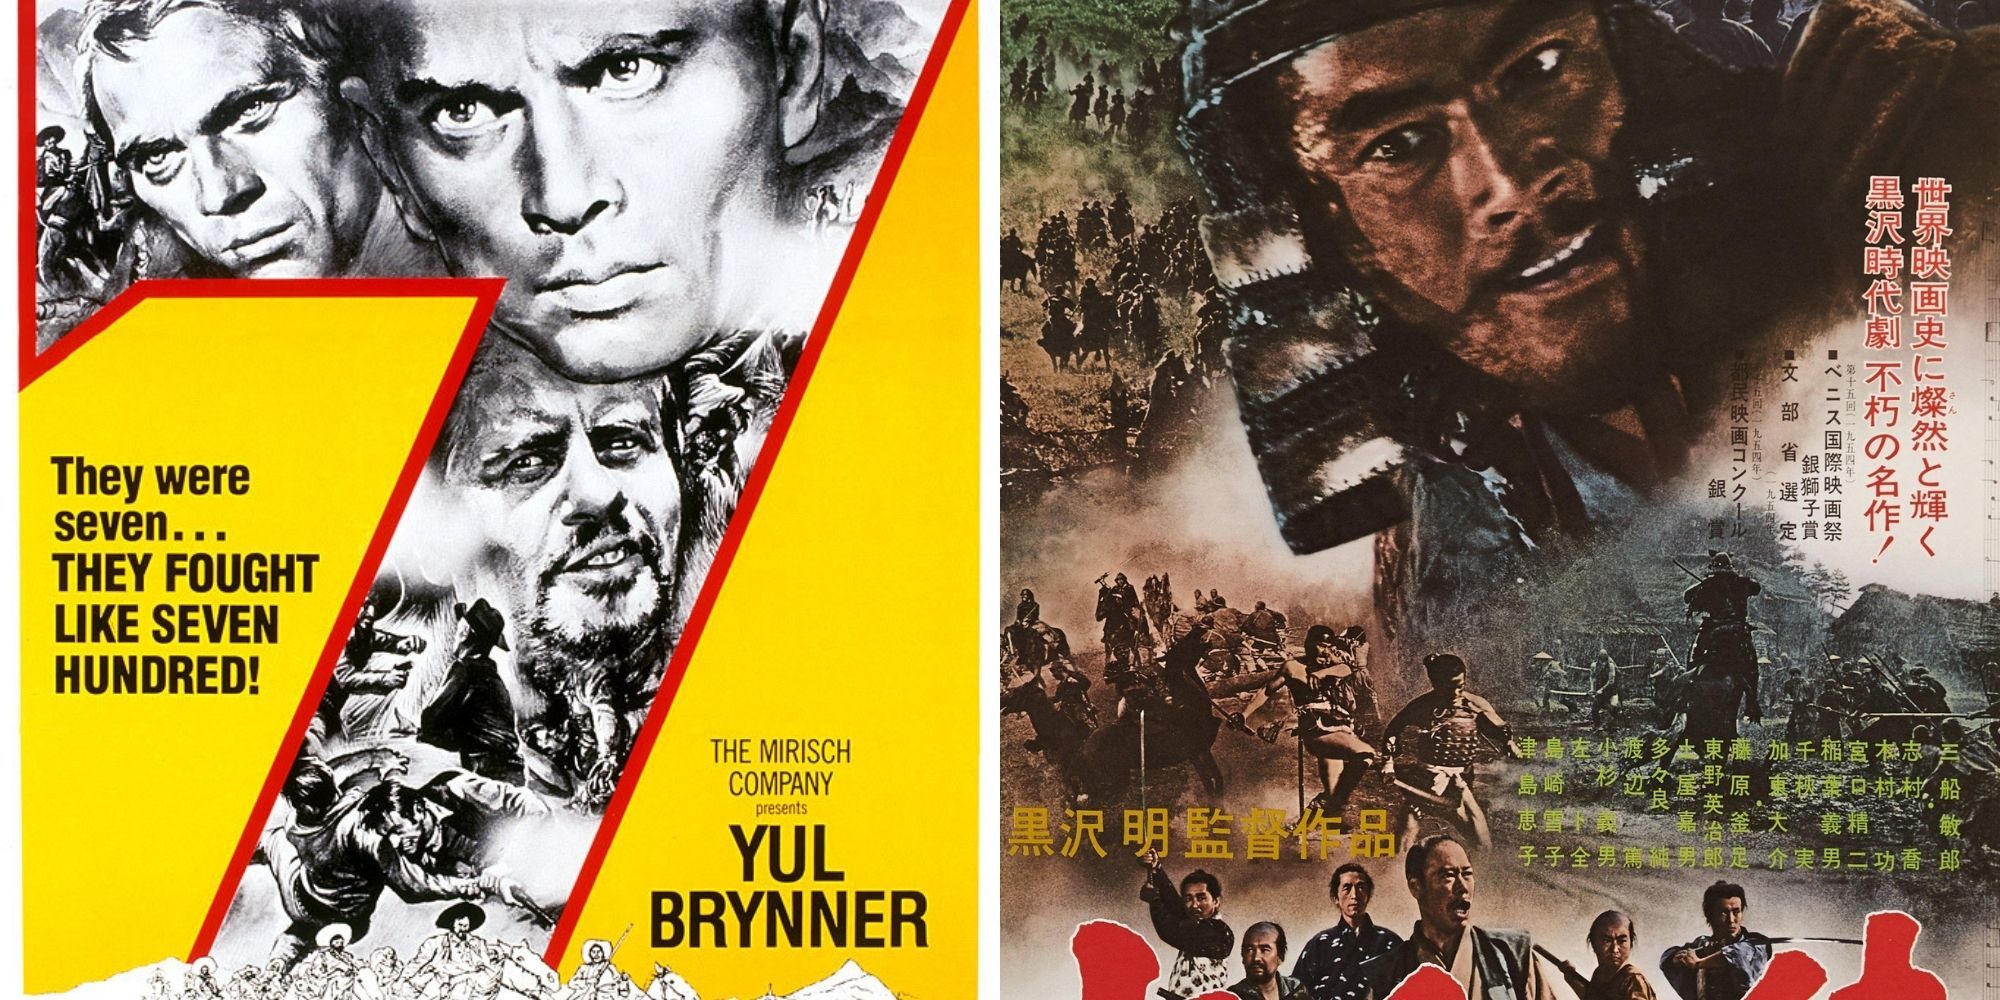 The Magnificent Seven poser on the left and Seven Samurai poster on the right